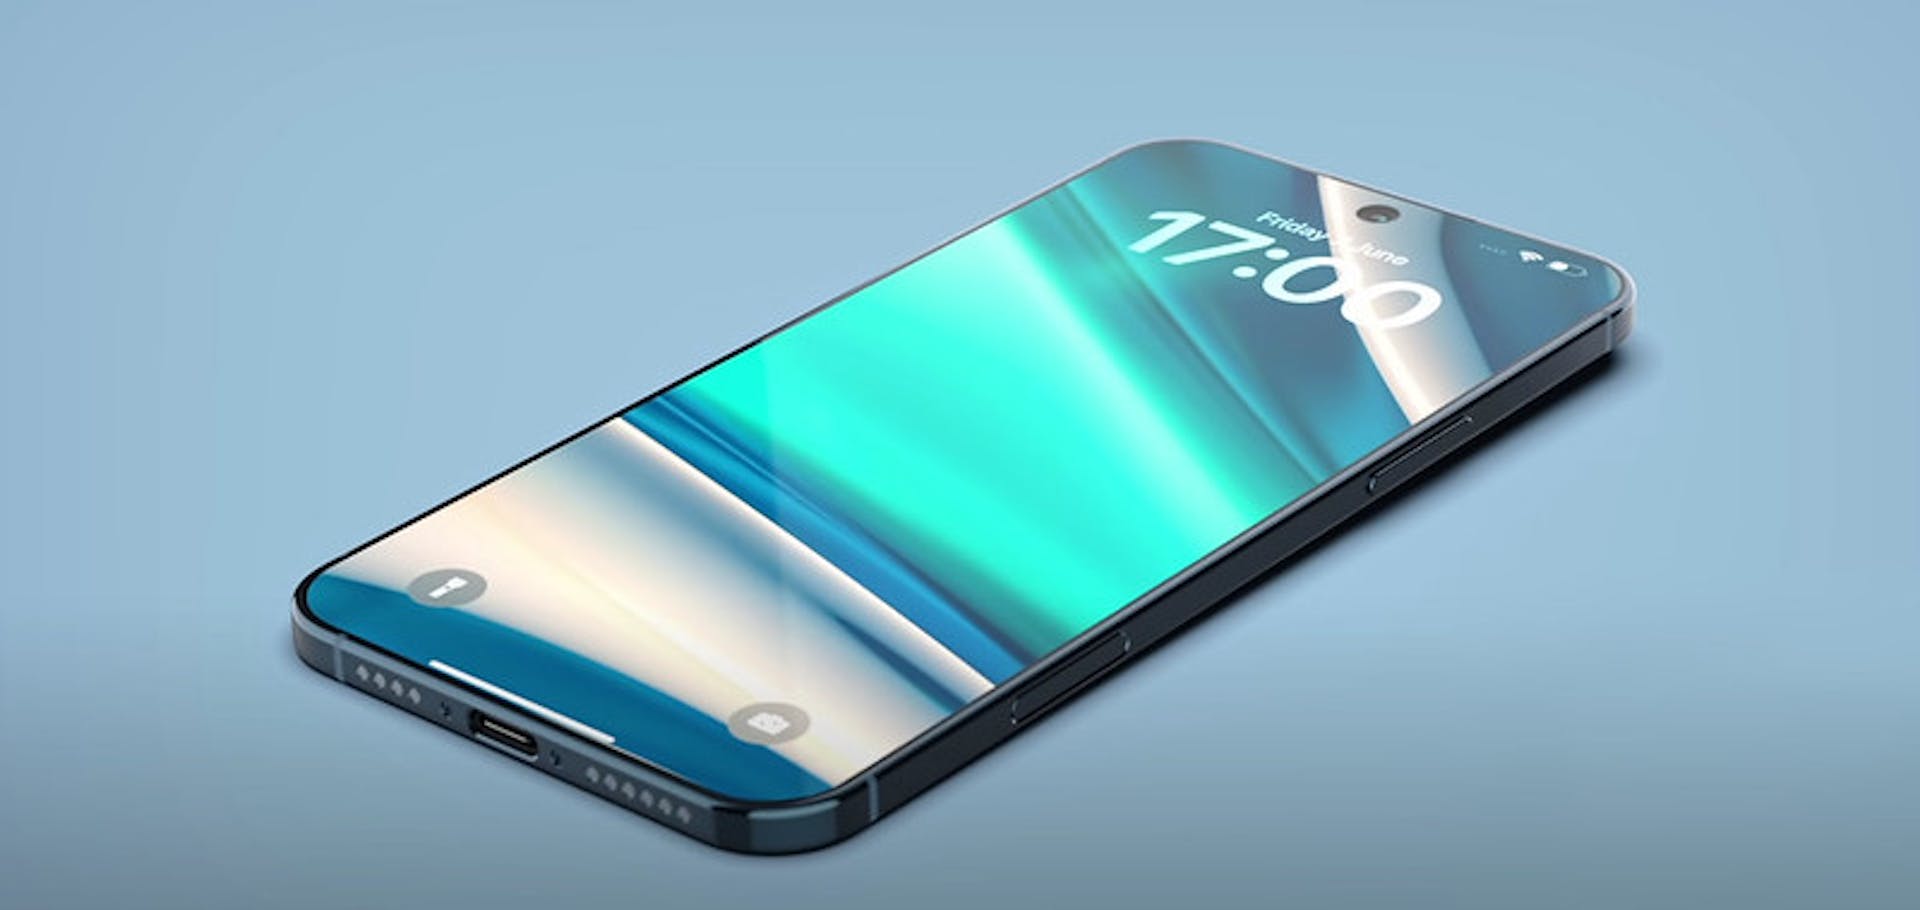 A futuristic iPhone. Image credit: ZONEofTECH